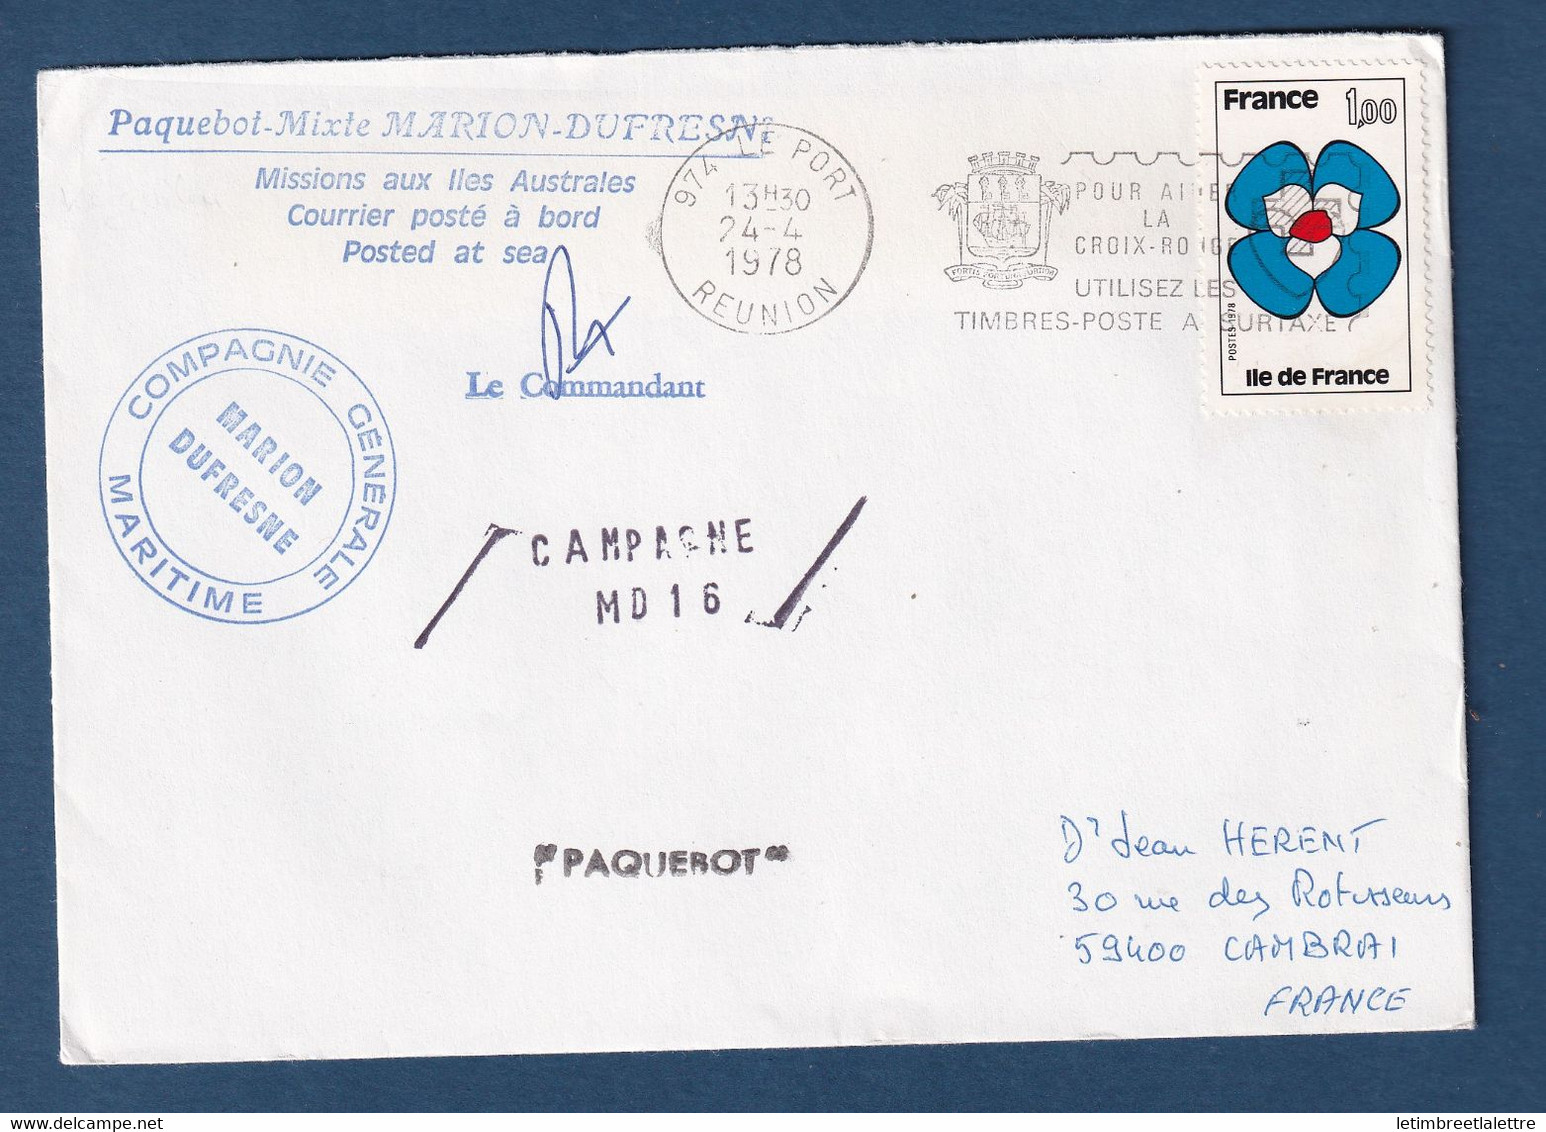 ⭐ France - N° 1991 - Paquebot - Enveloppe Marion Dufresne - Campagne MD 16 - 1978 ⭐ - Covers & Documents